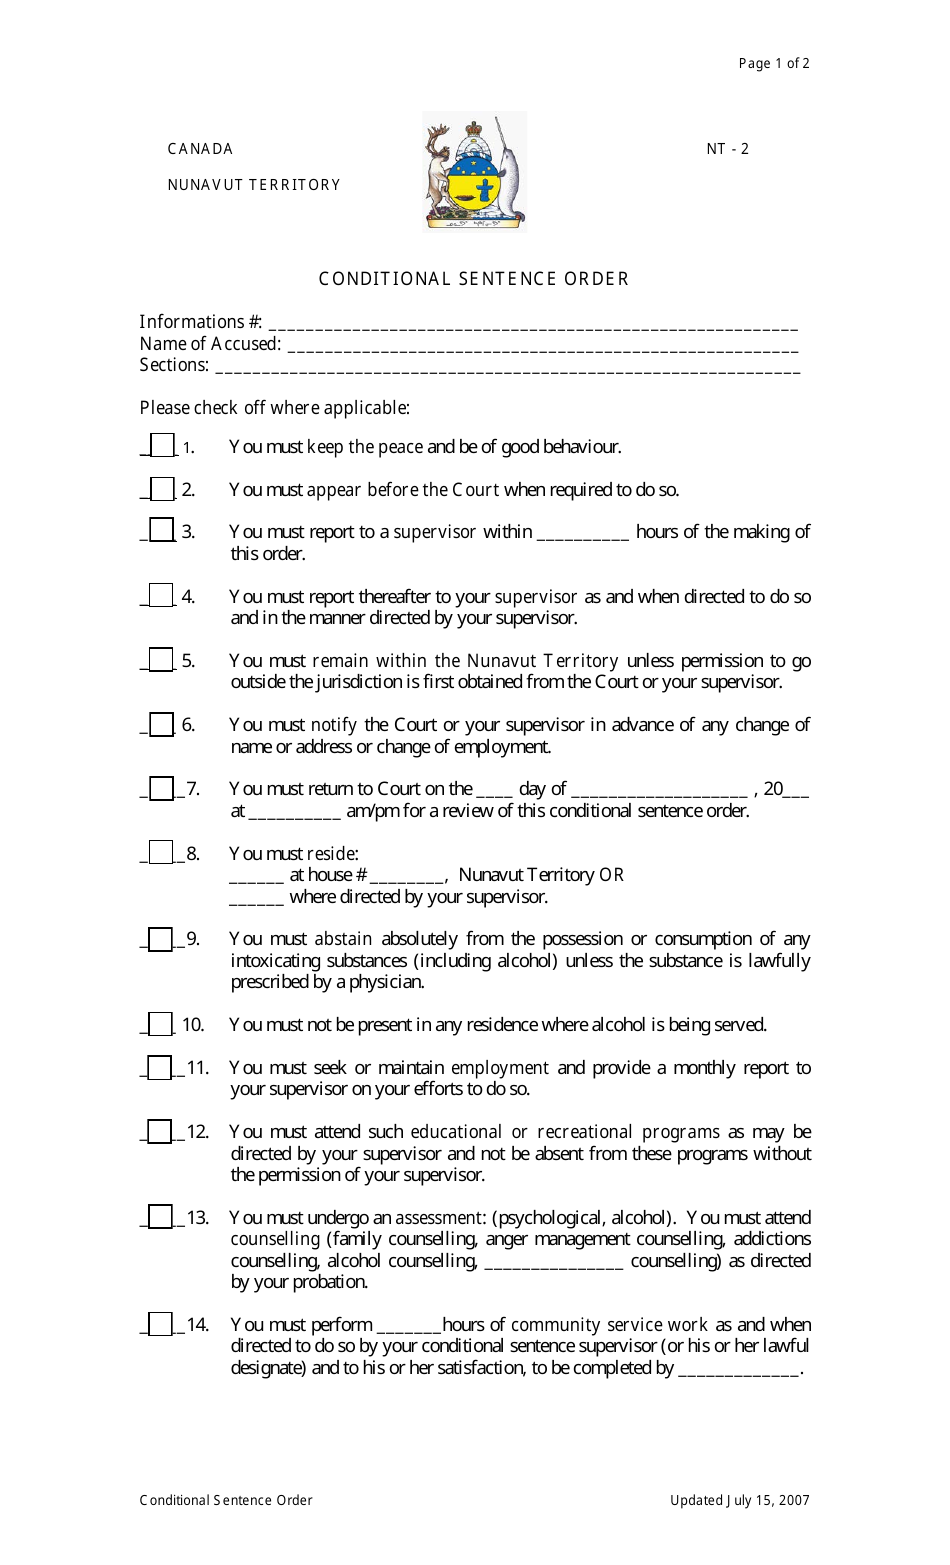 Form NT-2 Conditional Sentence Order - Nunavut, Canada, Page 1